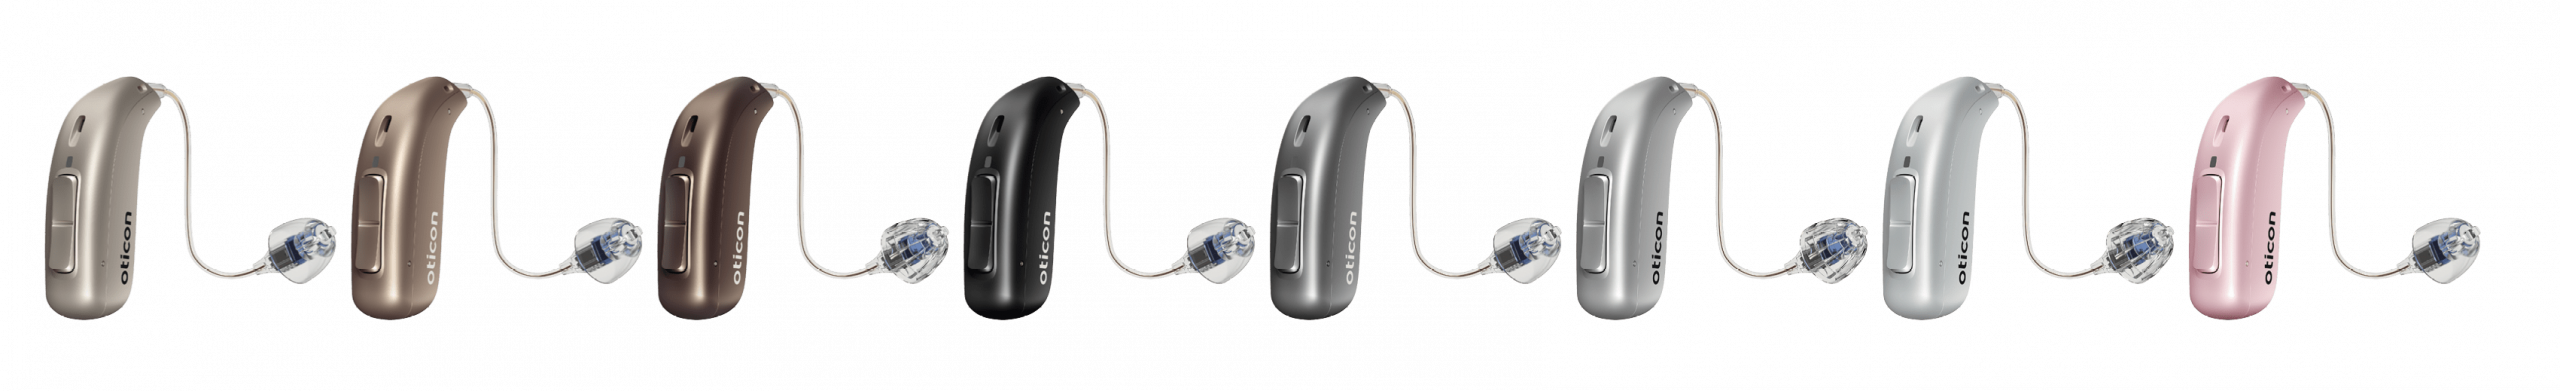 line up of hearing aids